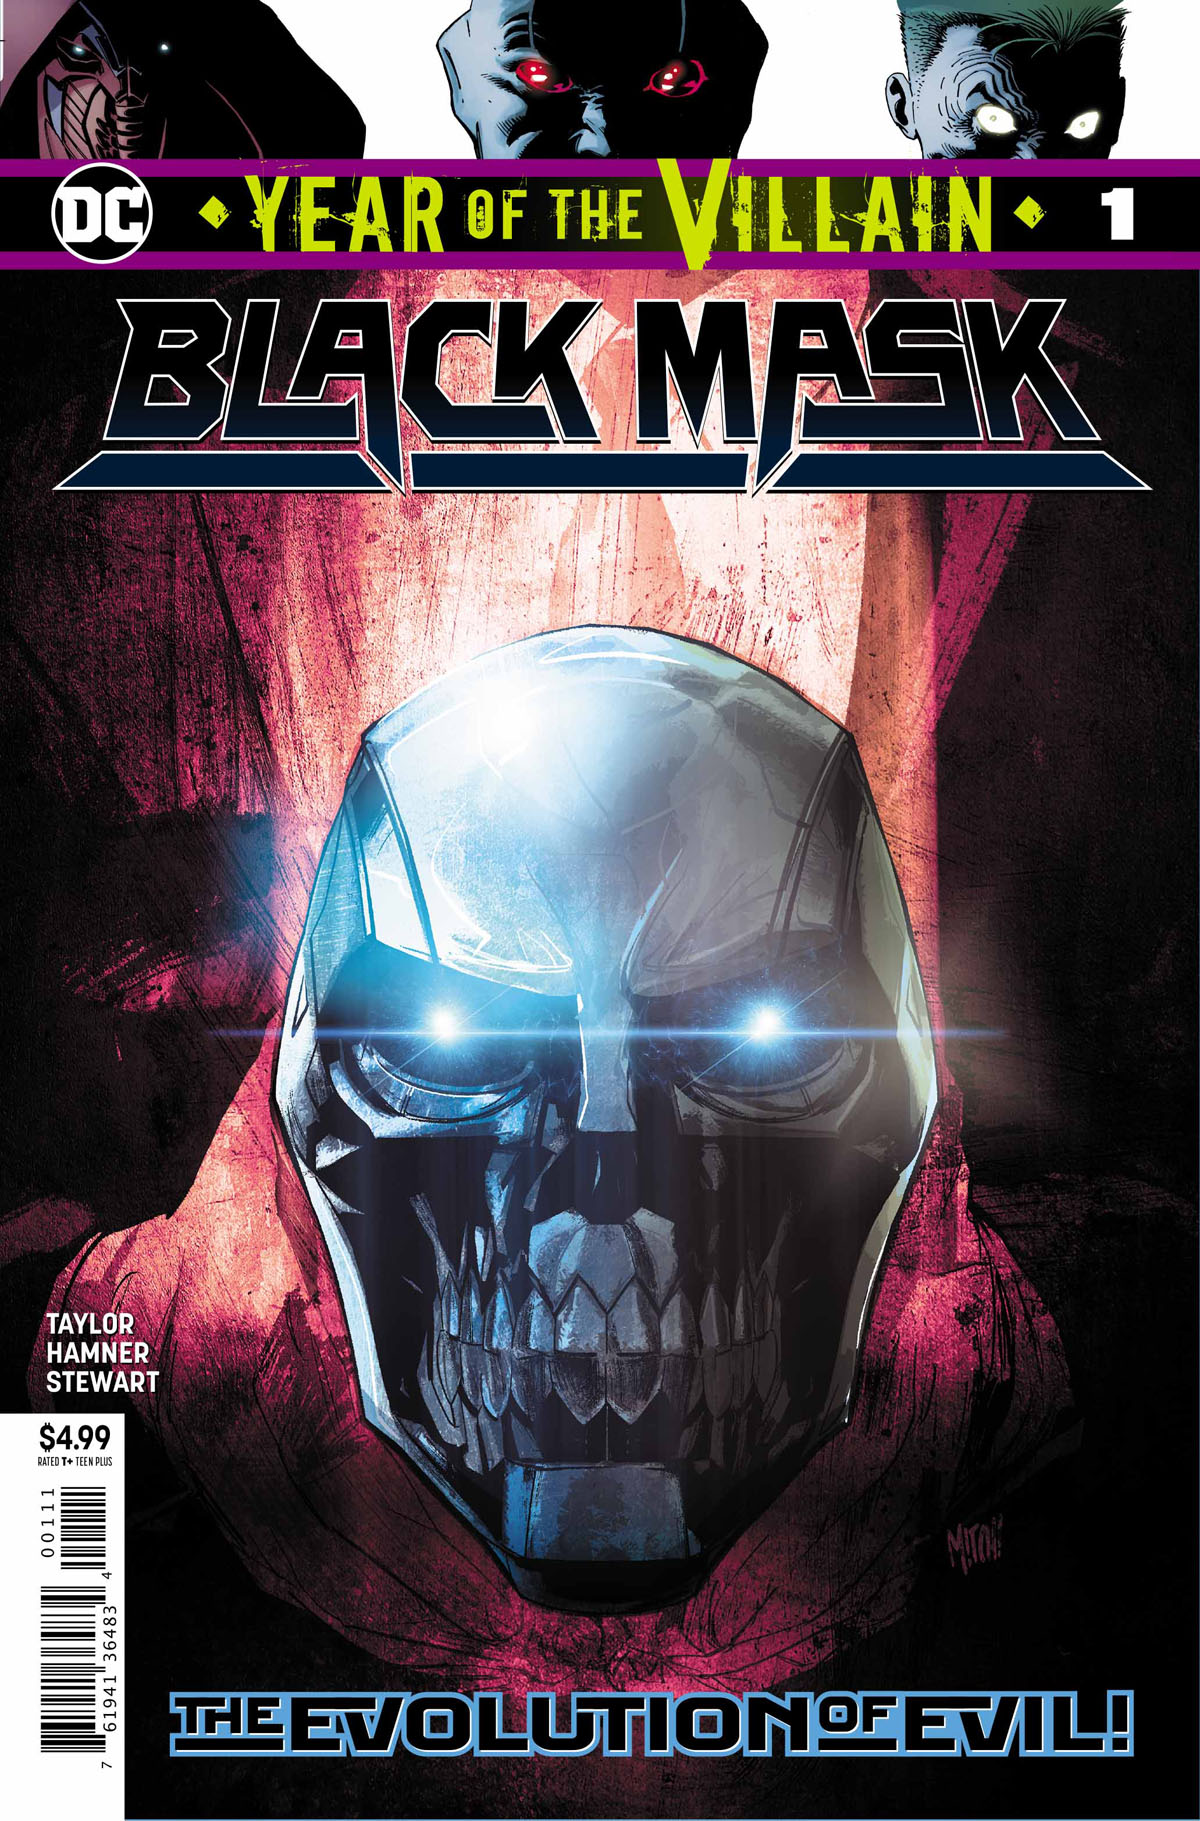 Black Mask: Year of the Villain #1 cover